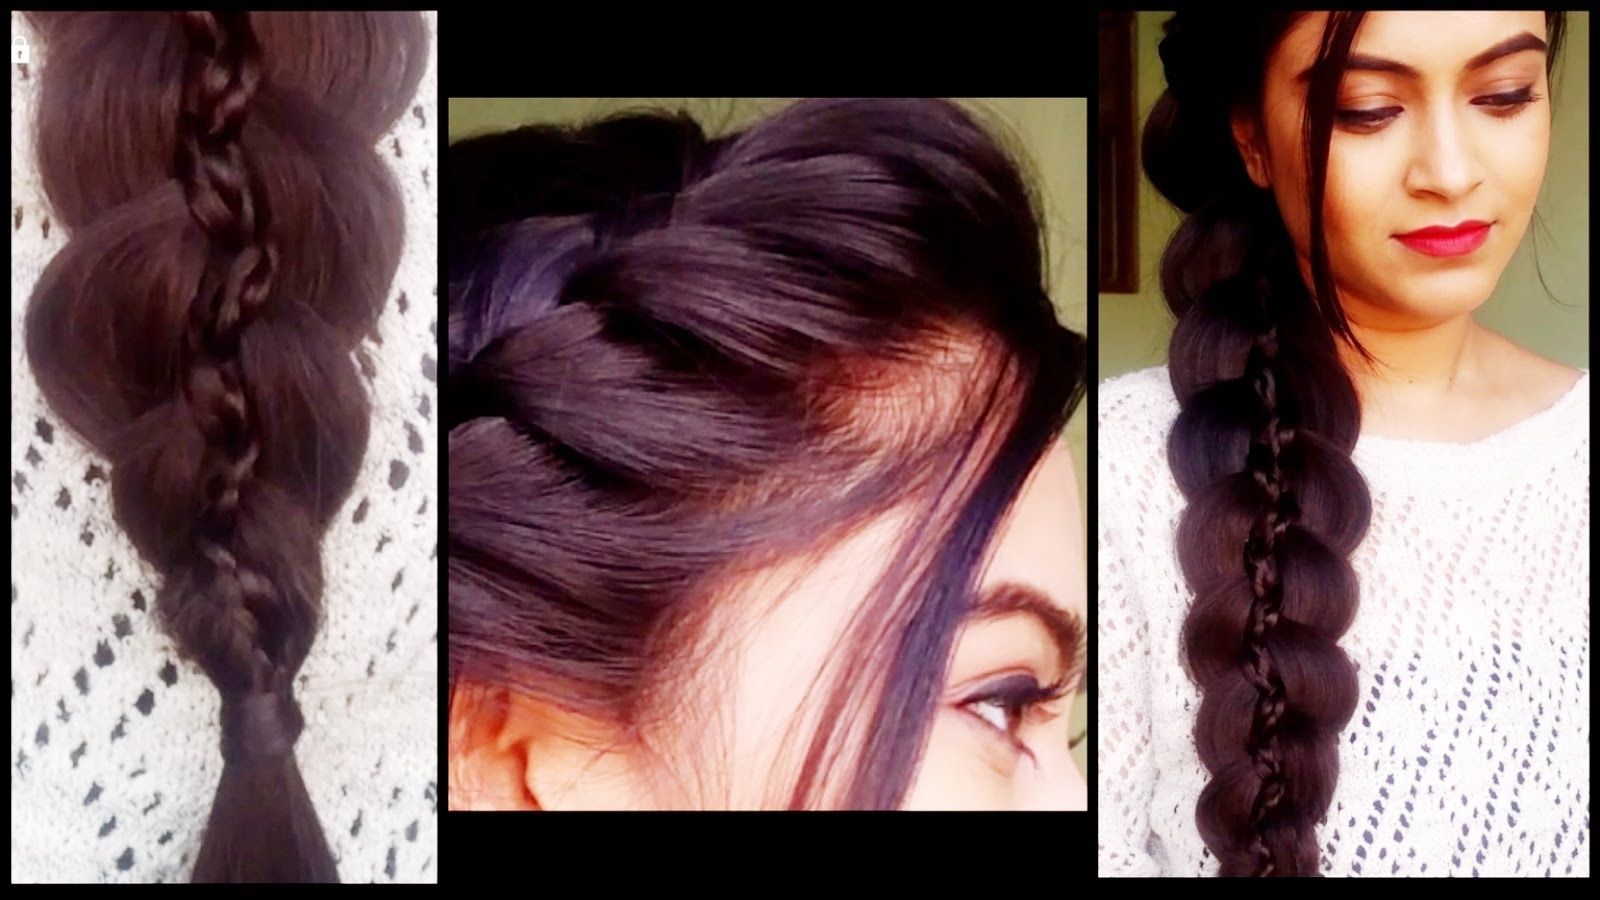 Braided 5 Strand Braid – Hairstyles For Medium/long Hair Prom Within Most Current Indian Braided Hairstyles (View 3 of 15)